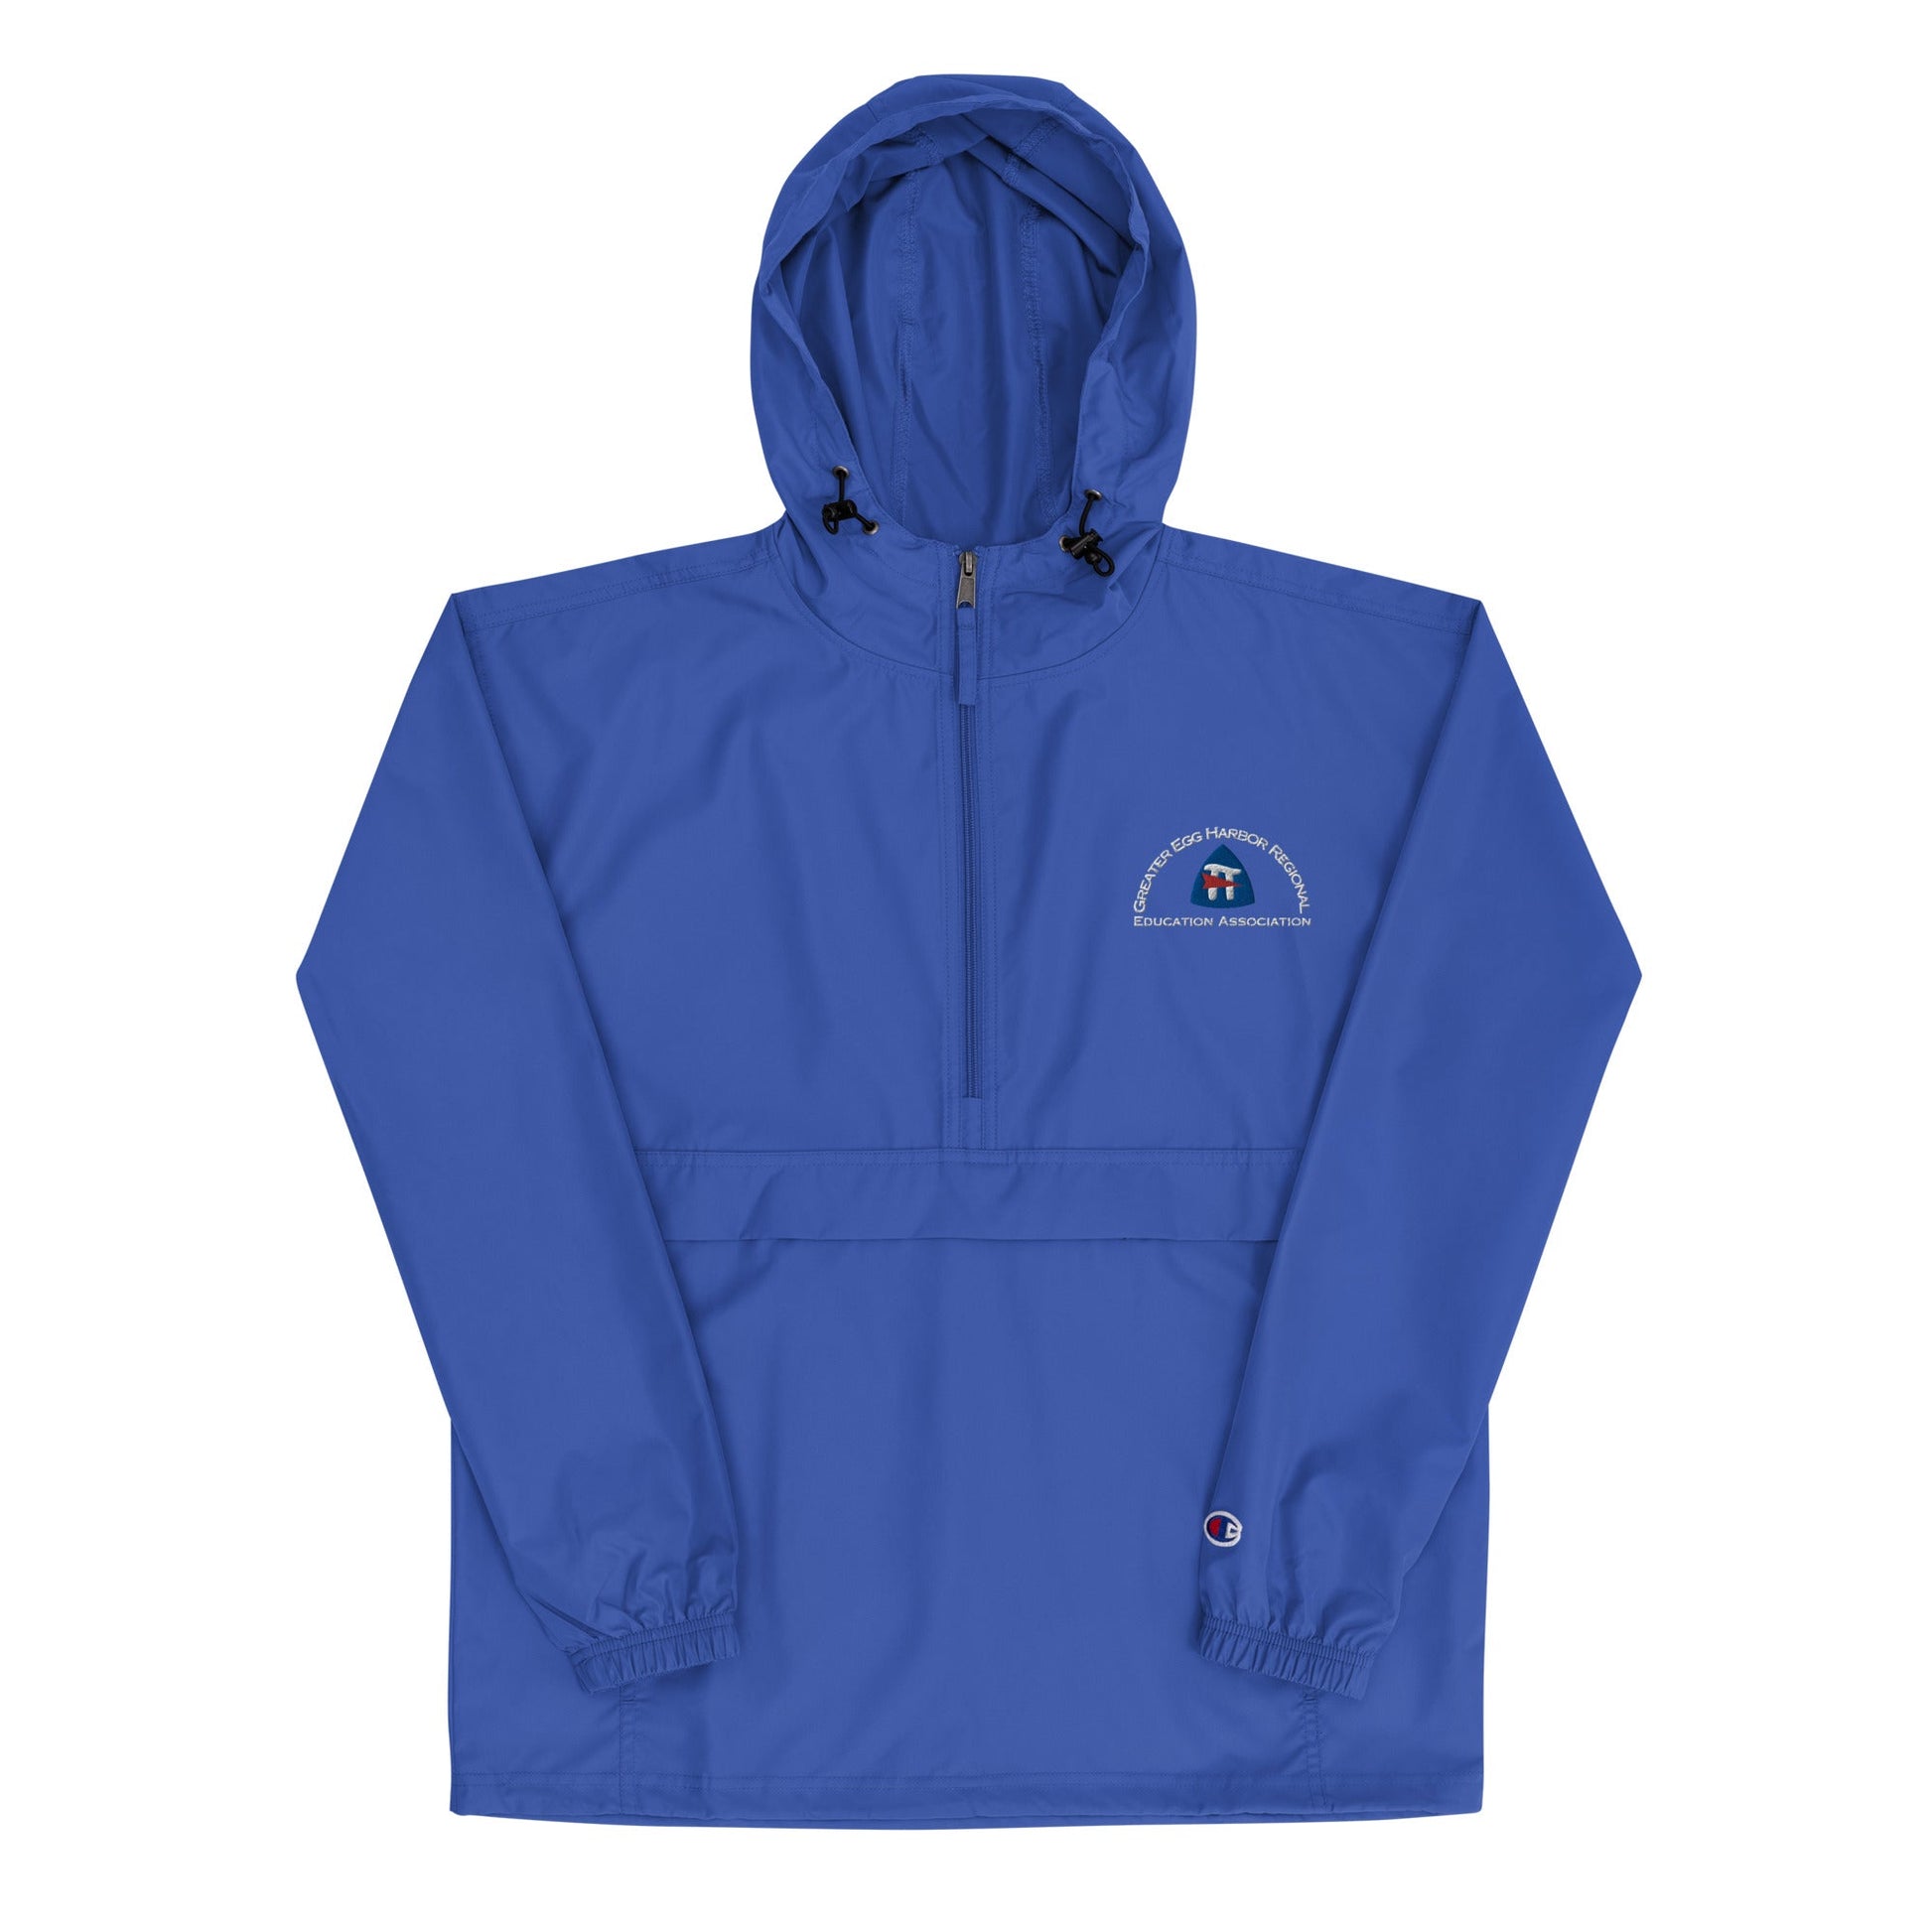 GEHREA Embroidered Champion Packable Jacket